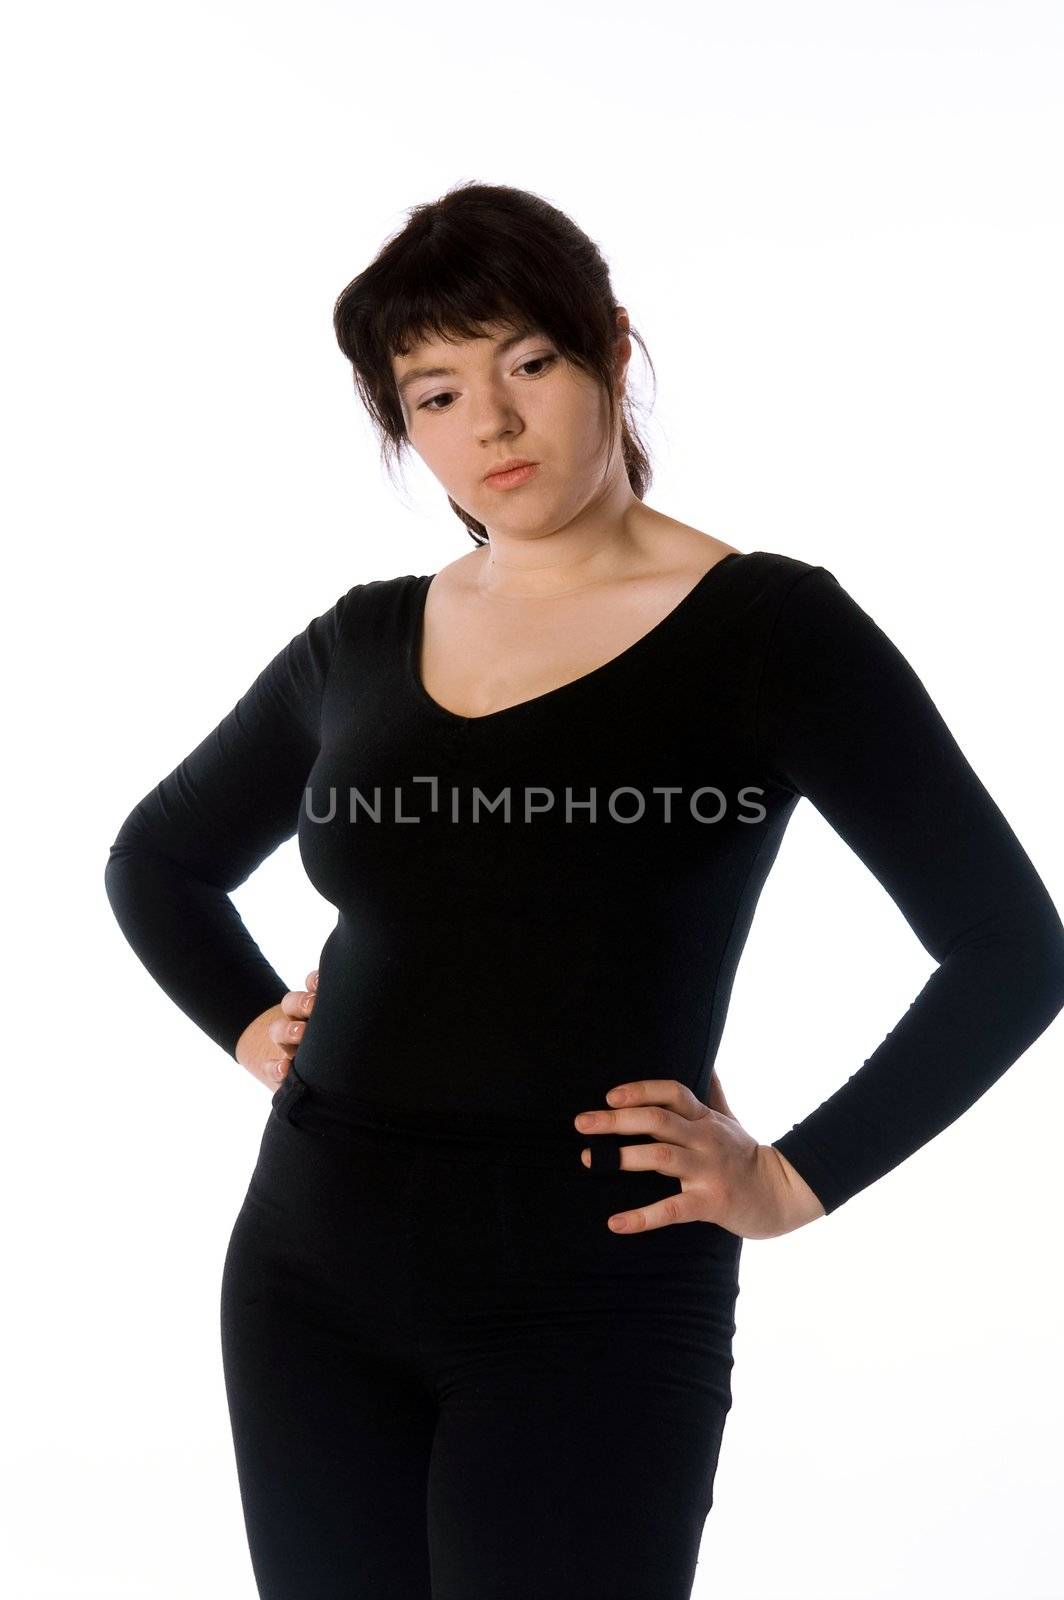 Depressed woman in black isolated on white